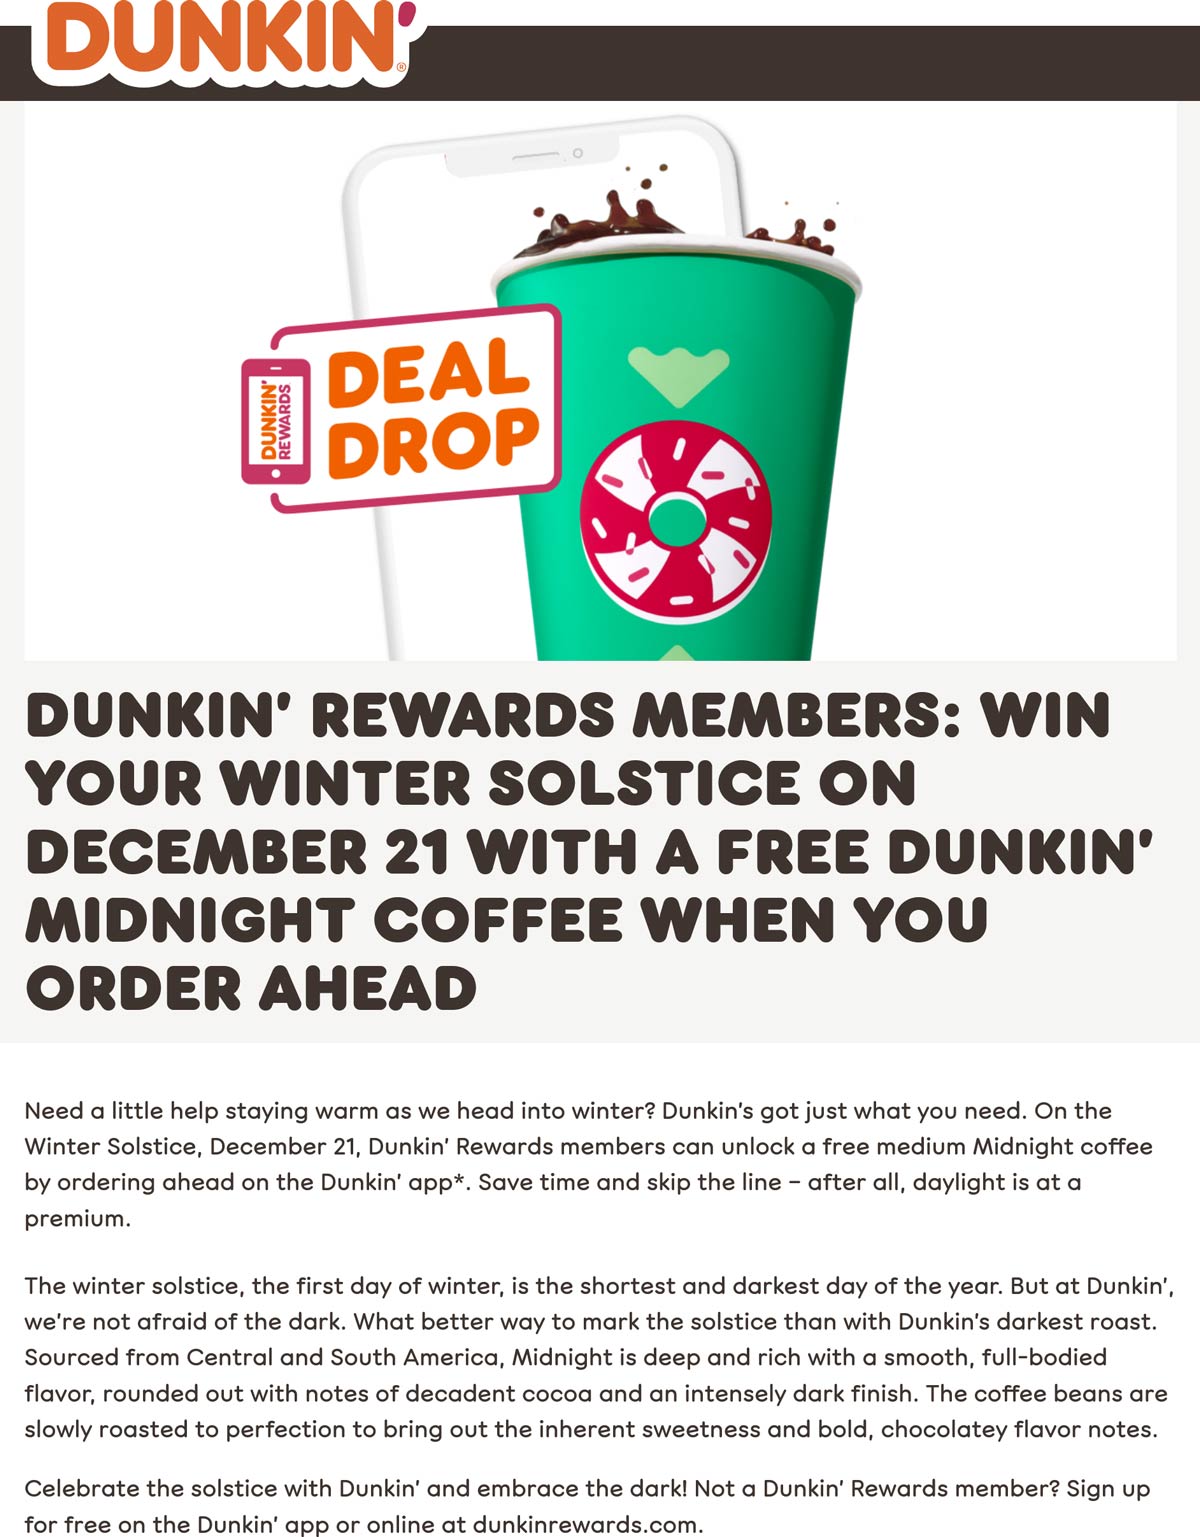 Dunkin Donuts restaurants Coupon  Order ahead for a free medium Midnight coffee via mobile today at Dunkin Donuts #dunkindonuts 